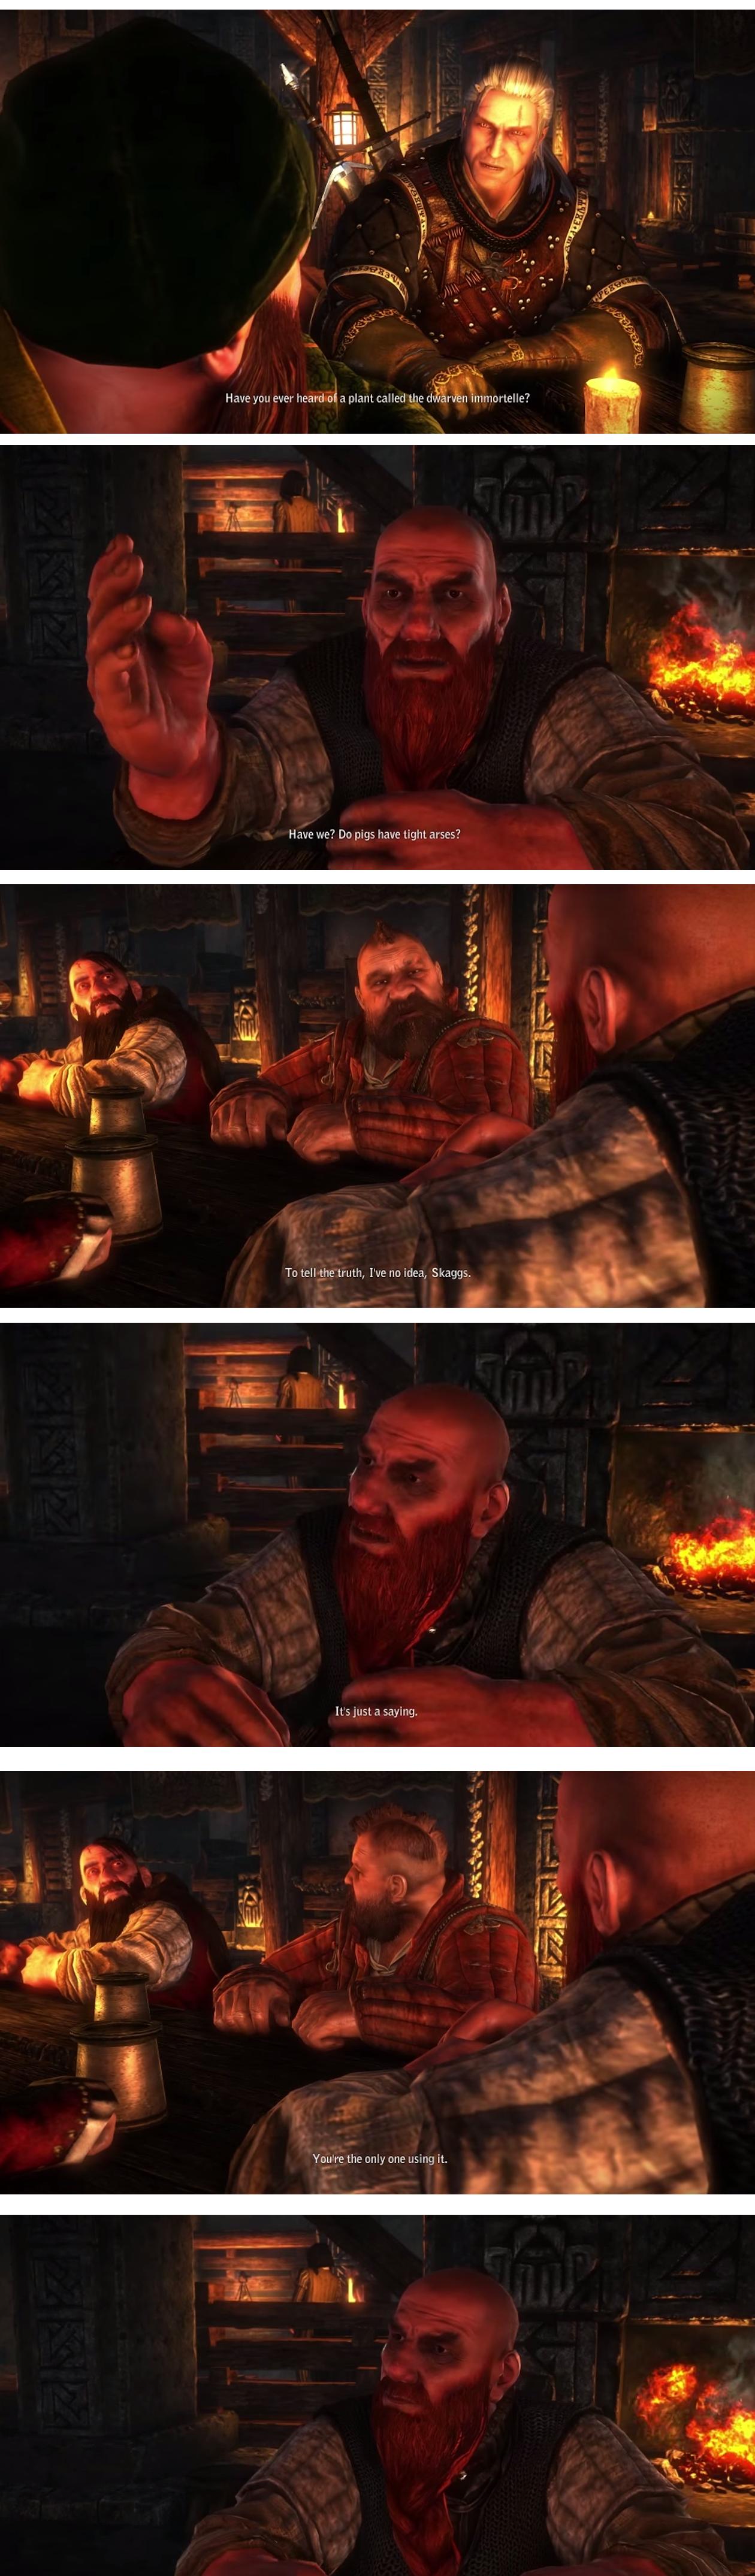 The dwarves' dialogues never fails to cheer you up